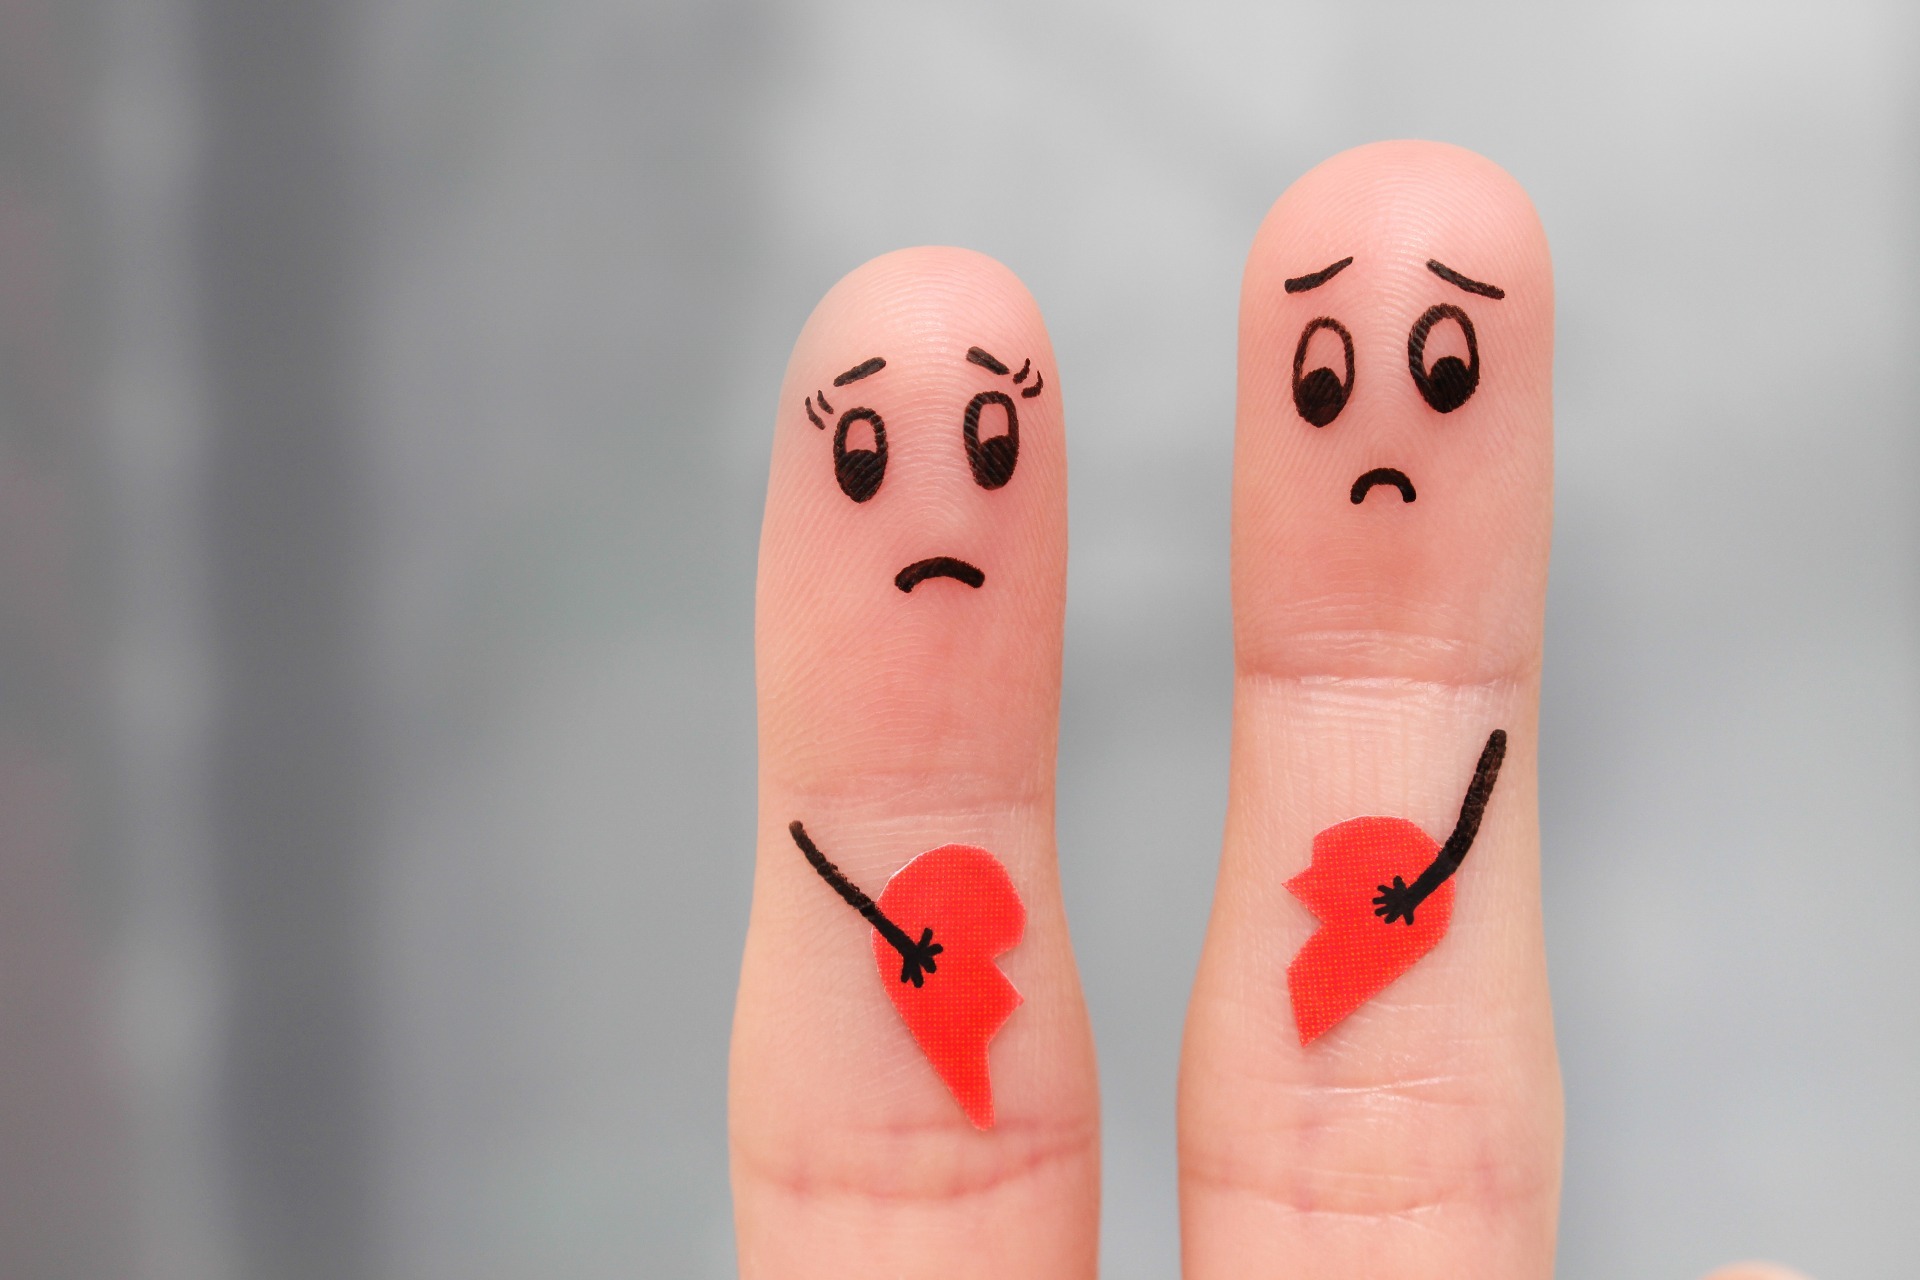 Two fingers, with a sad male face and a sad female face drawn on, each holding half of a red, broken heart.